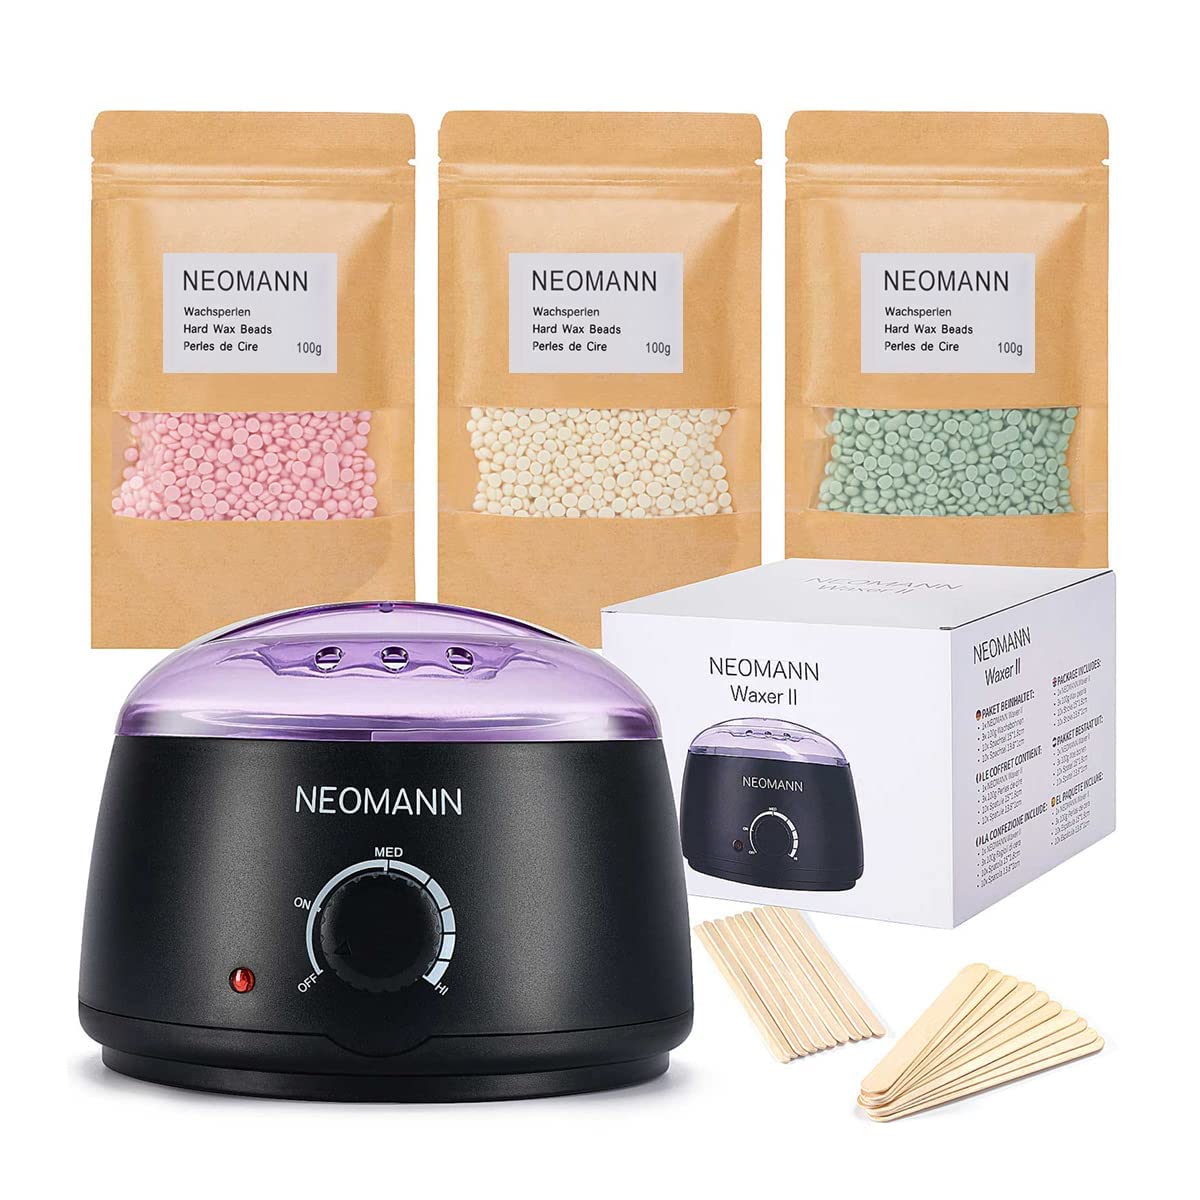 NEOMANN Waxer II Waxing Kit for Women and Men Non-Sticky, Teflon-coated - Wax Warmer for Hair Removal incl 300g Wax Beads, 20 Sp